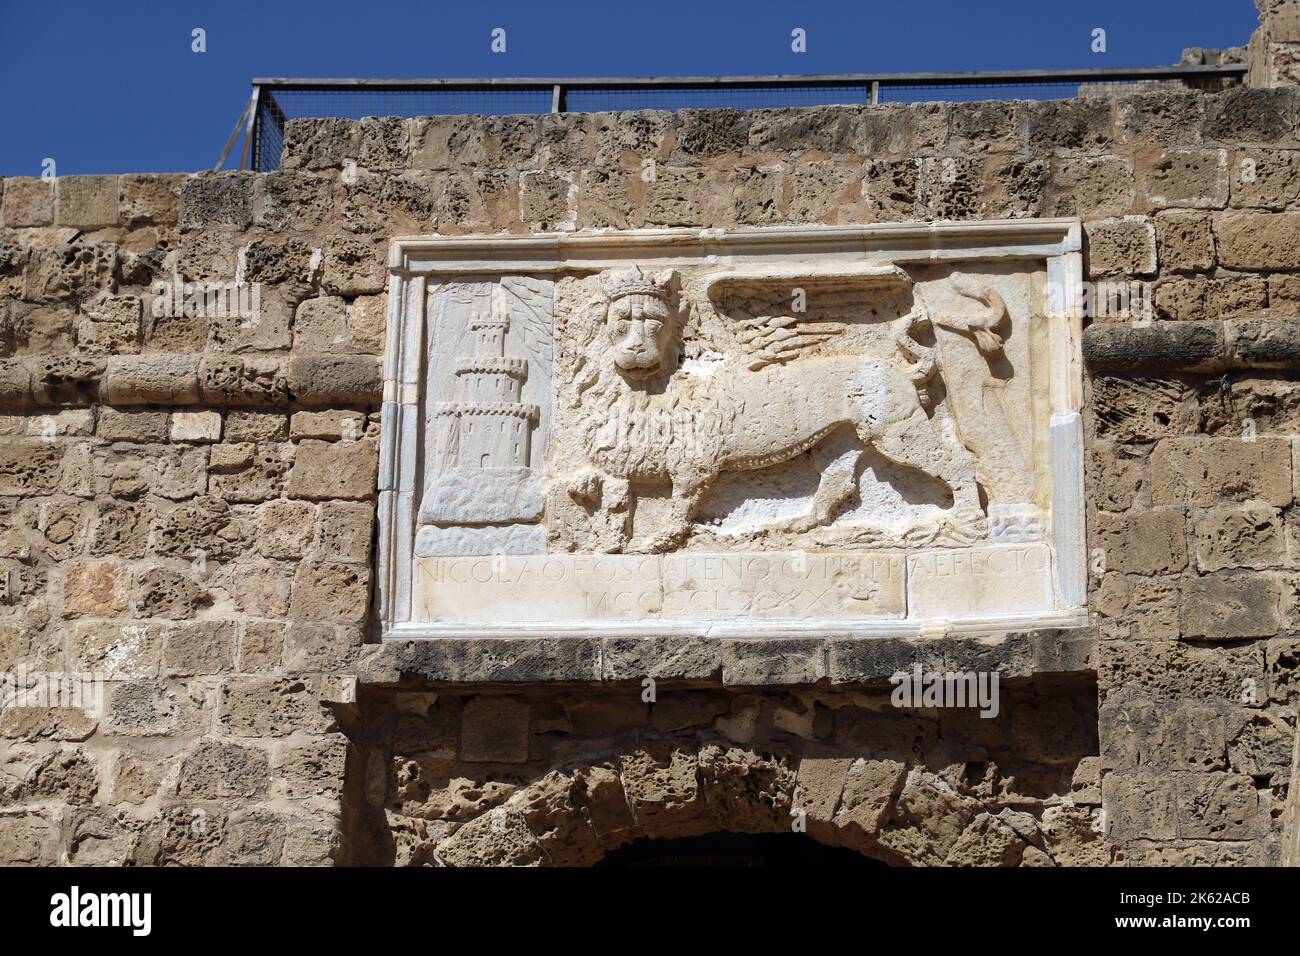 Relief of the Lion of St Mark on the walls of Othello Castle, Famagusta (Gazimagusa ) Turkish Republic of Northern Cyprus Stock Photo